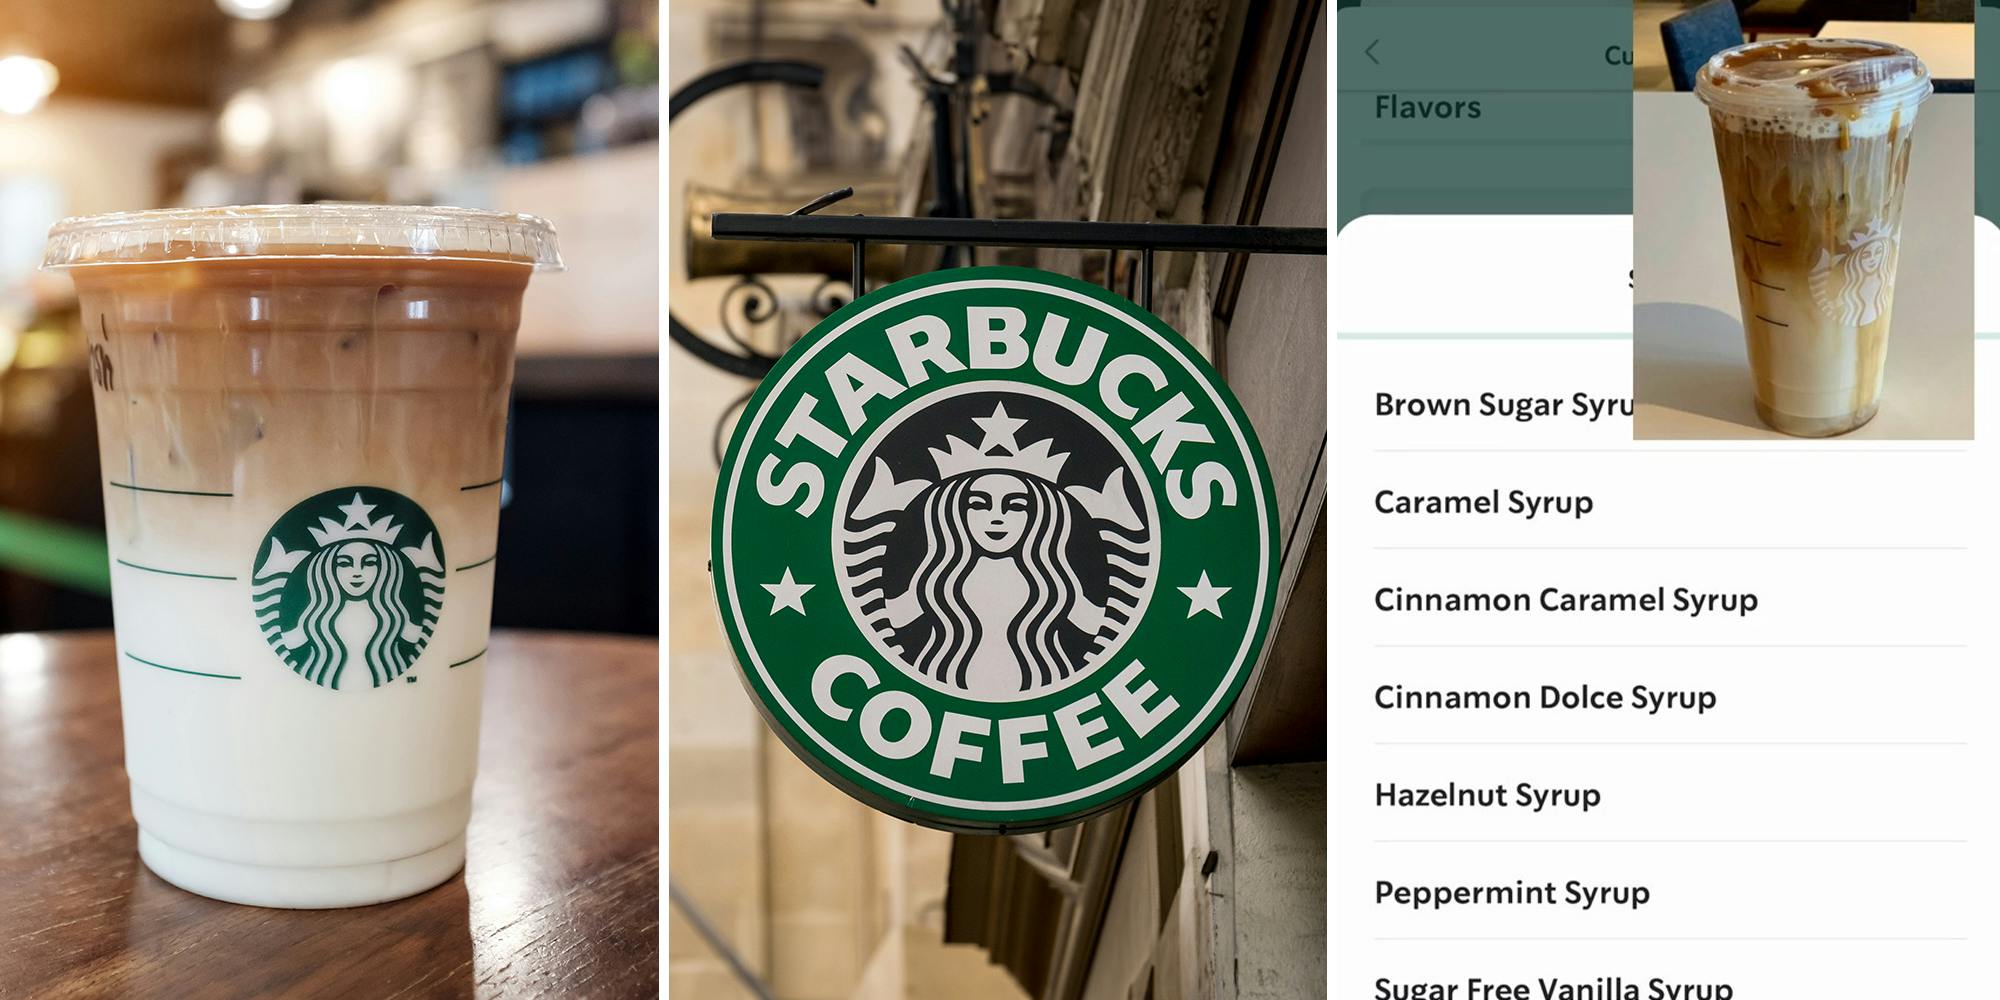 ‘The secret is out’: Customer shares hack to getting $3.35 venti espresso drink from Starbucks